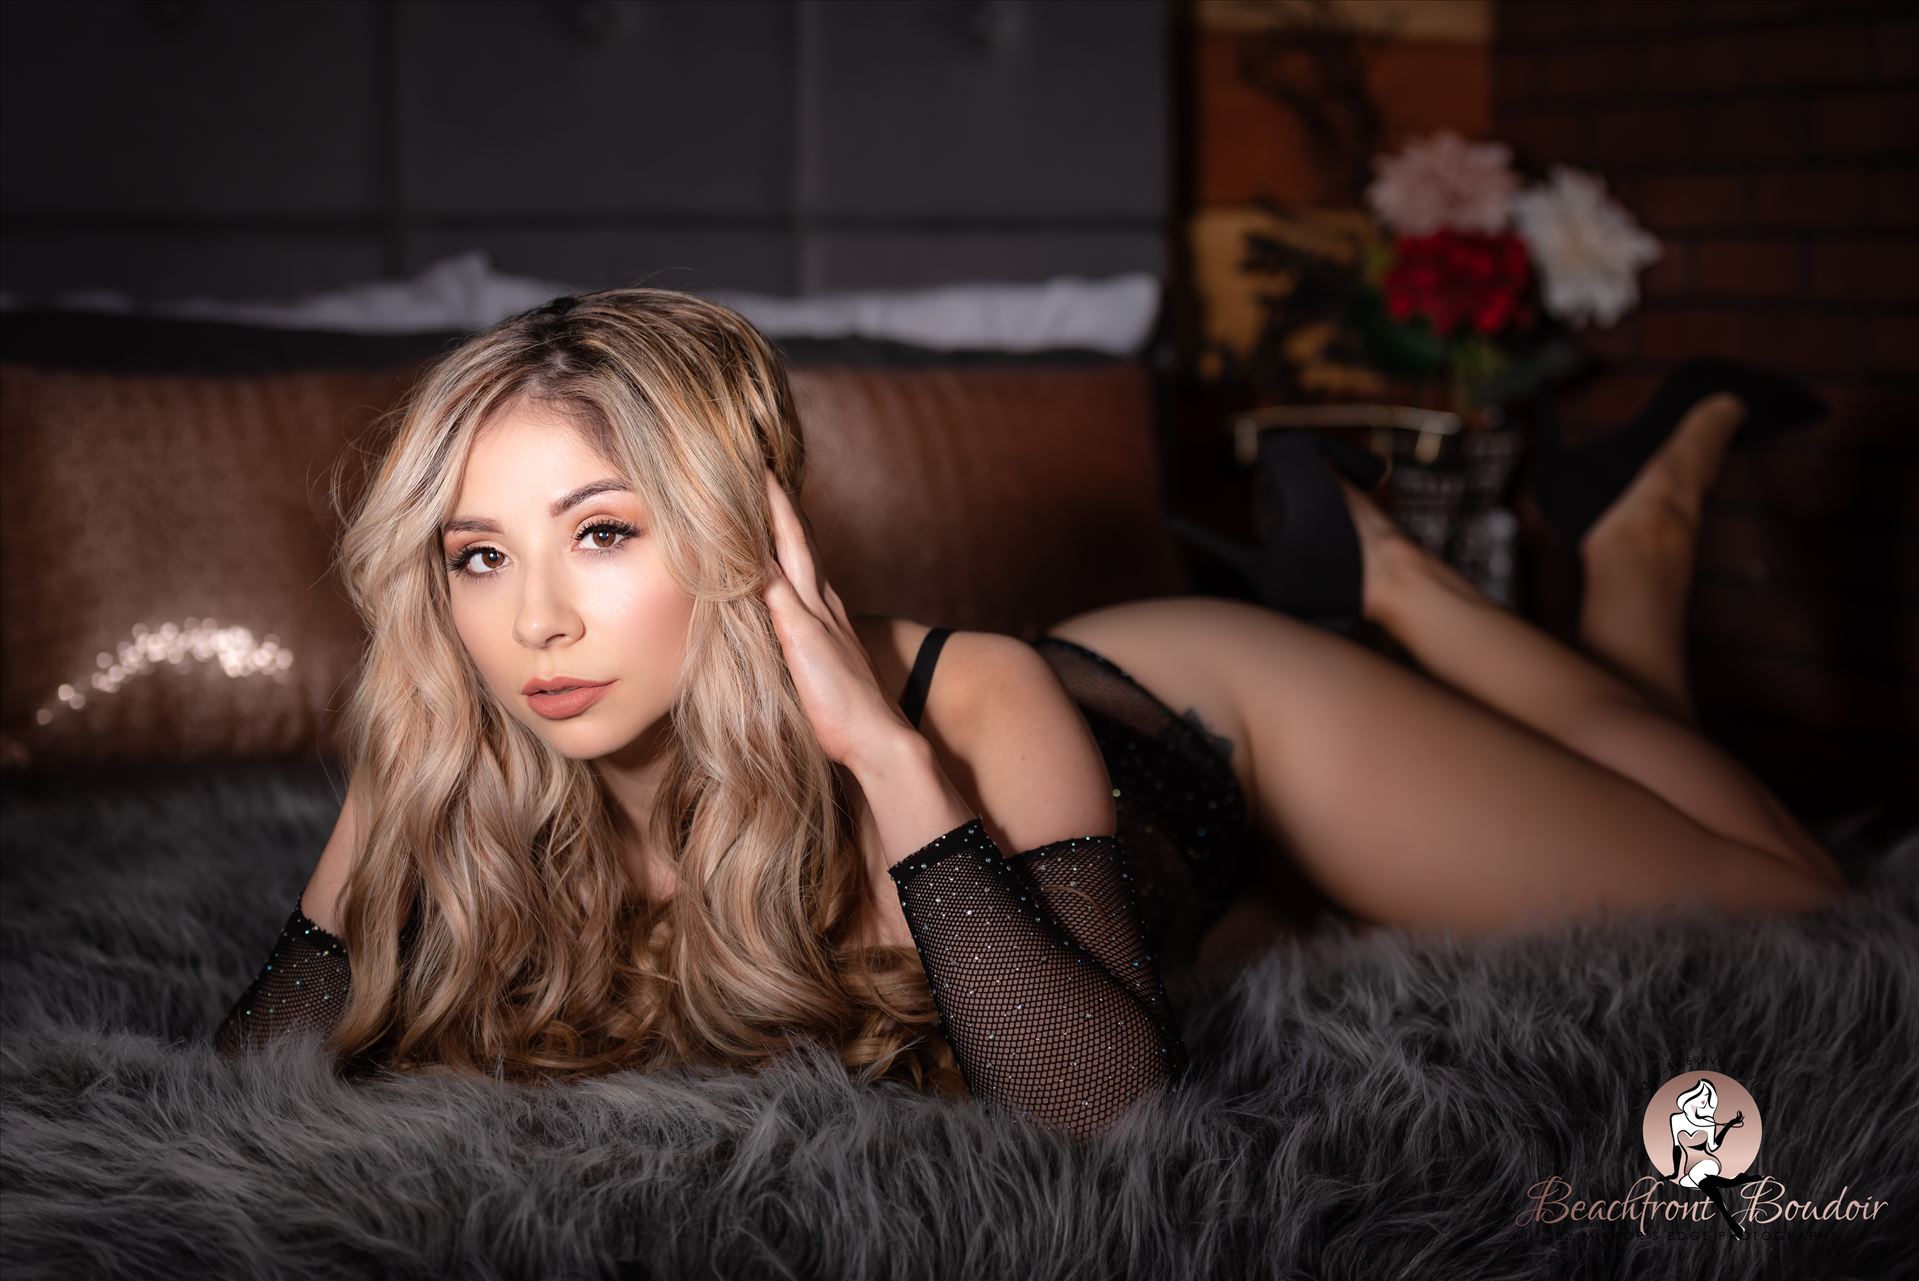 Port-7229.JPGBeachfront Boudoir by Mirror's Edge Photography is a Boutique Luxury Boudoir Photography Studio located just blocks from the beach in Oceano, California. My mission is to show as many women as possible how beautiful they truly are!  Incredible 